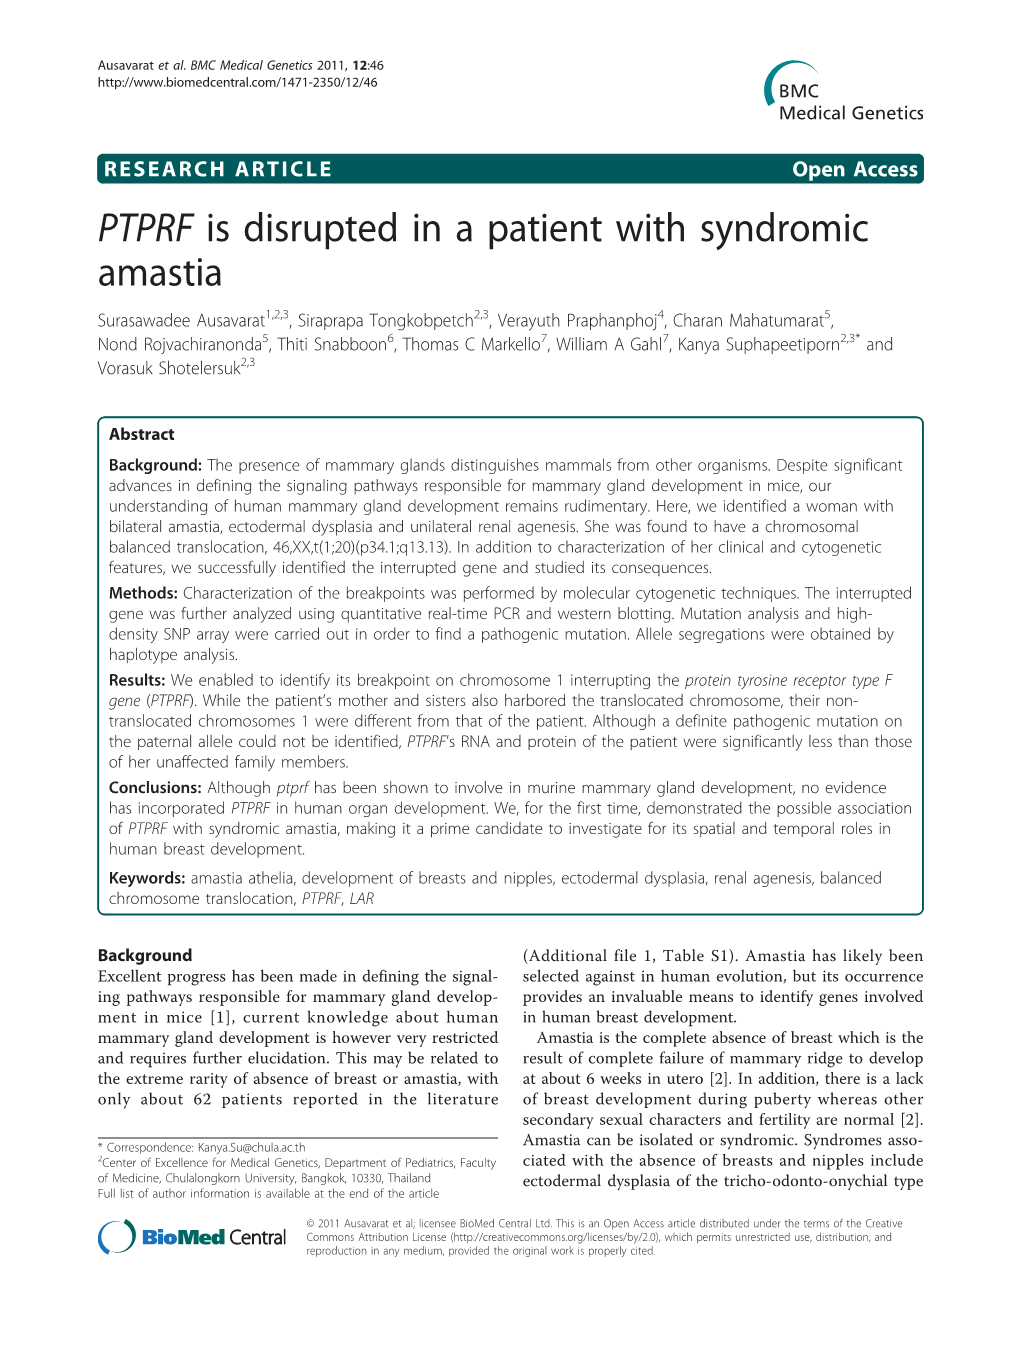 PTPRF Is Disrupted in a Patient with Syndromic Amastia